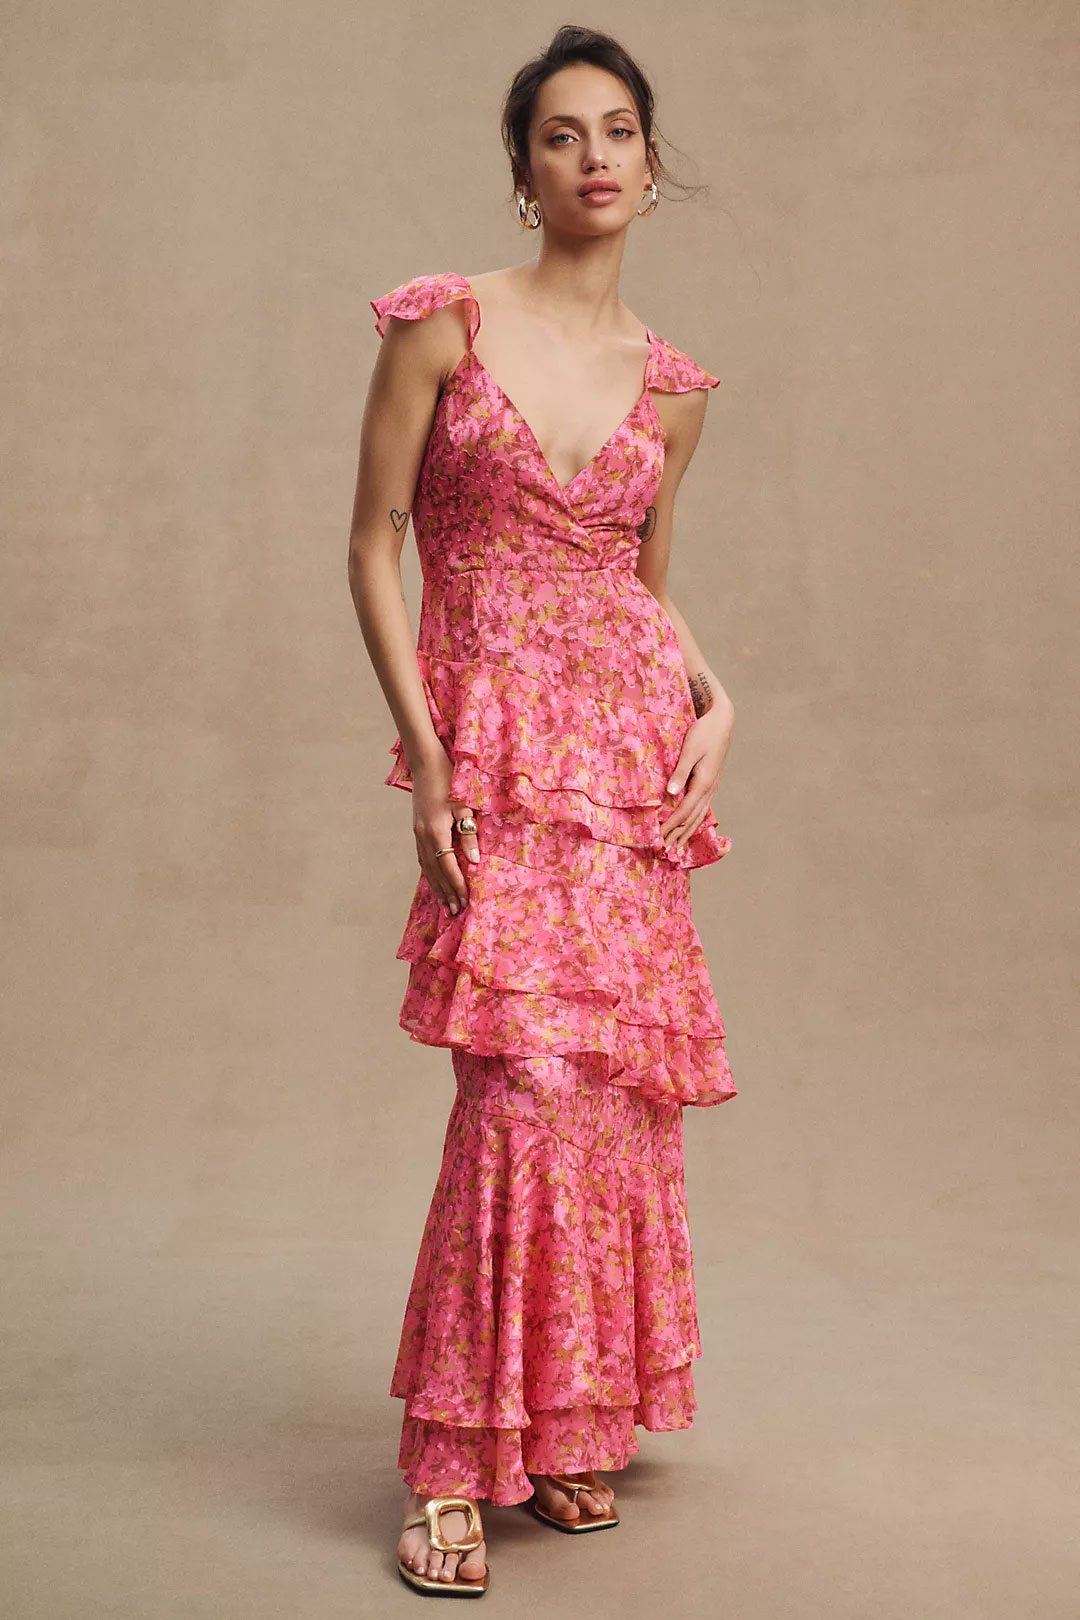 floral ruffle pink bridesmaid dress from Anthro